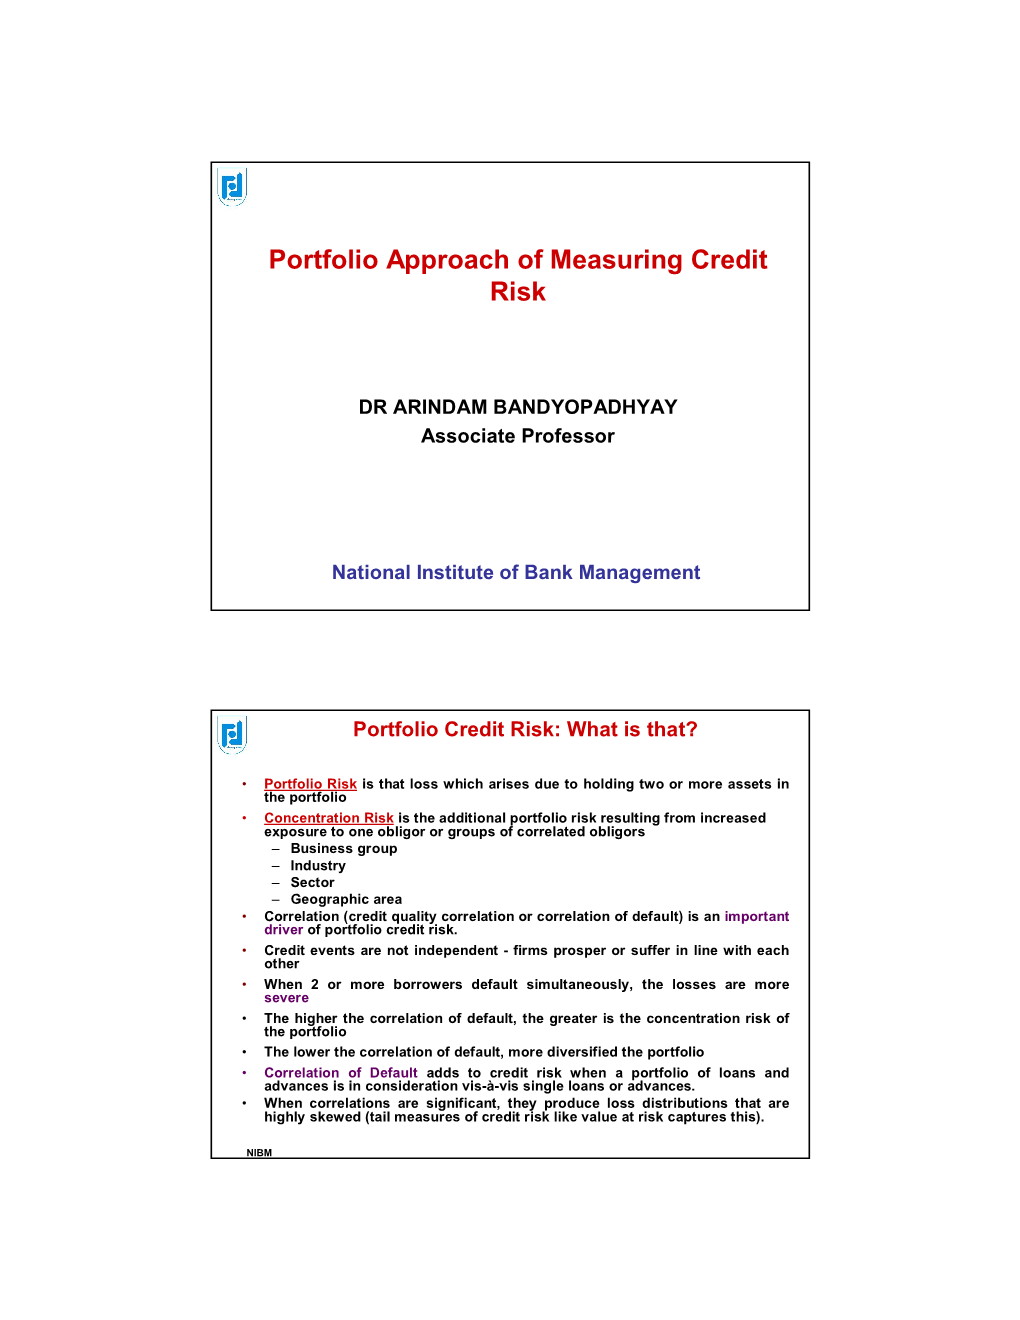 Portfolio Approach of Measuring Credit Risk by Arindam